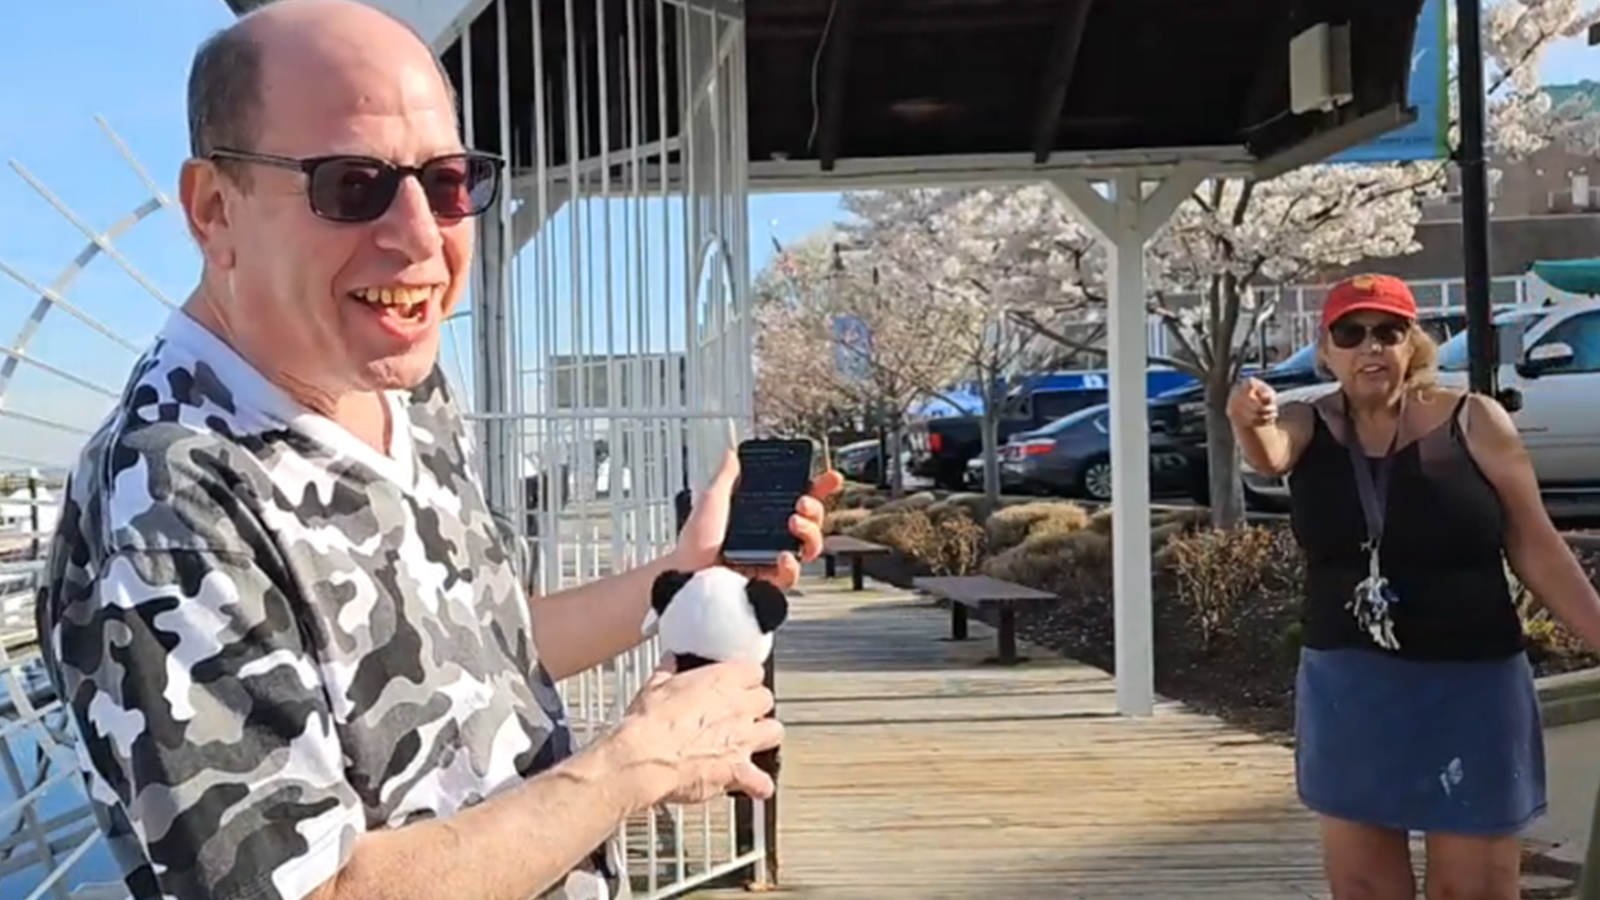 Twitch streamer has perfect response to ‘Karen’ accusing him of trespassing on boat dock